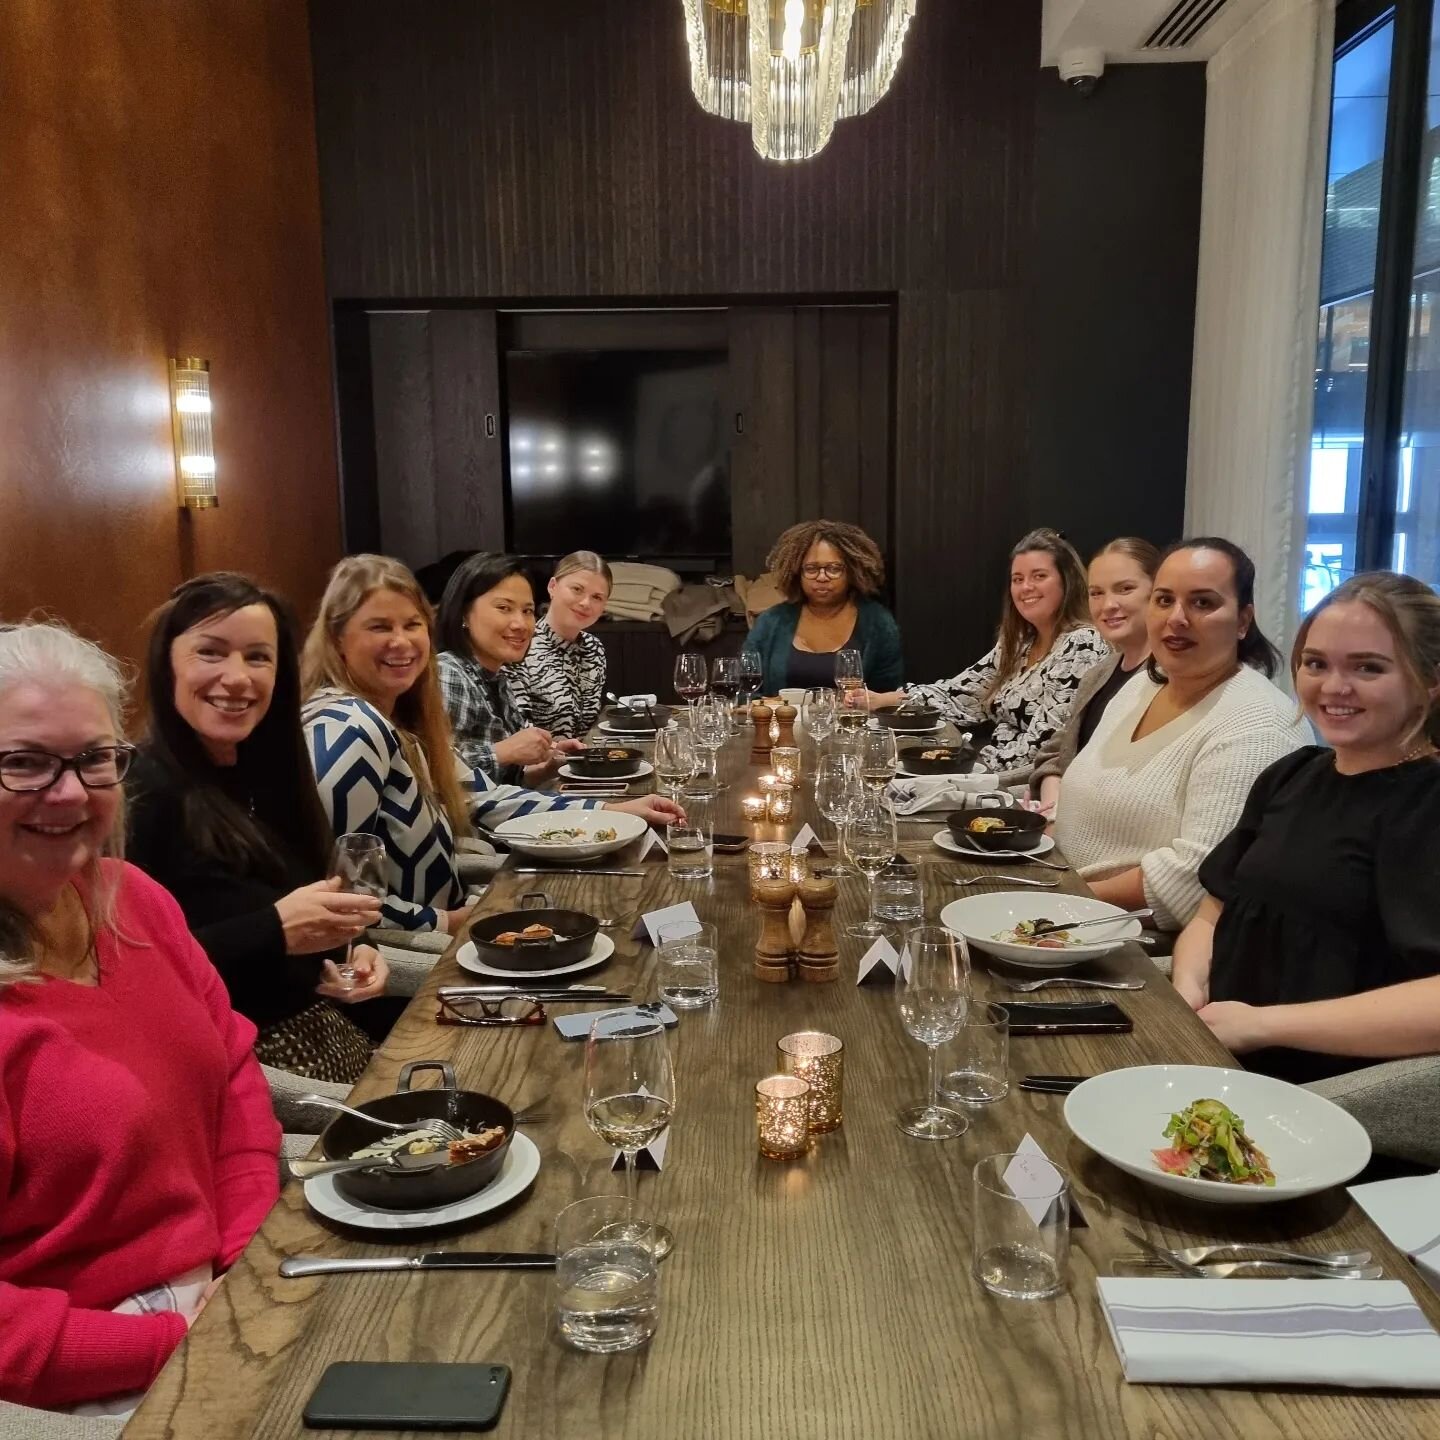 What a pleasure to host @missjonesgroup in our Private Dining Room last night. Click the link in our bio to talk to our team about hiring this amazing space.
#privatedining #privatehire #foodandwine @generalcatalyst @deltaexec @bechtelcorp @rothschil